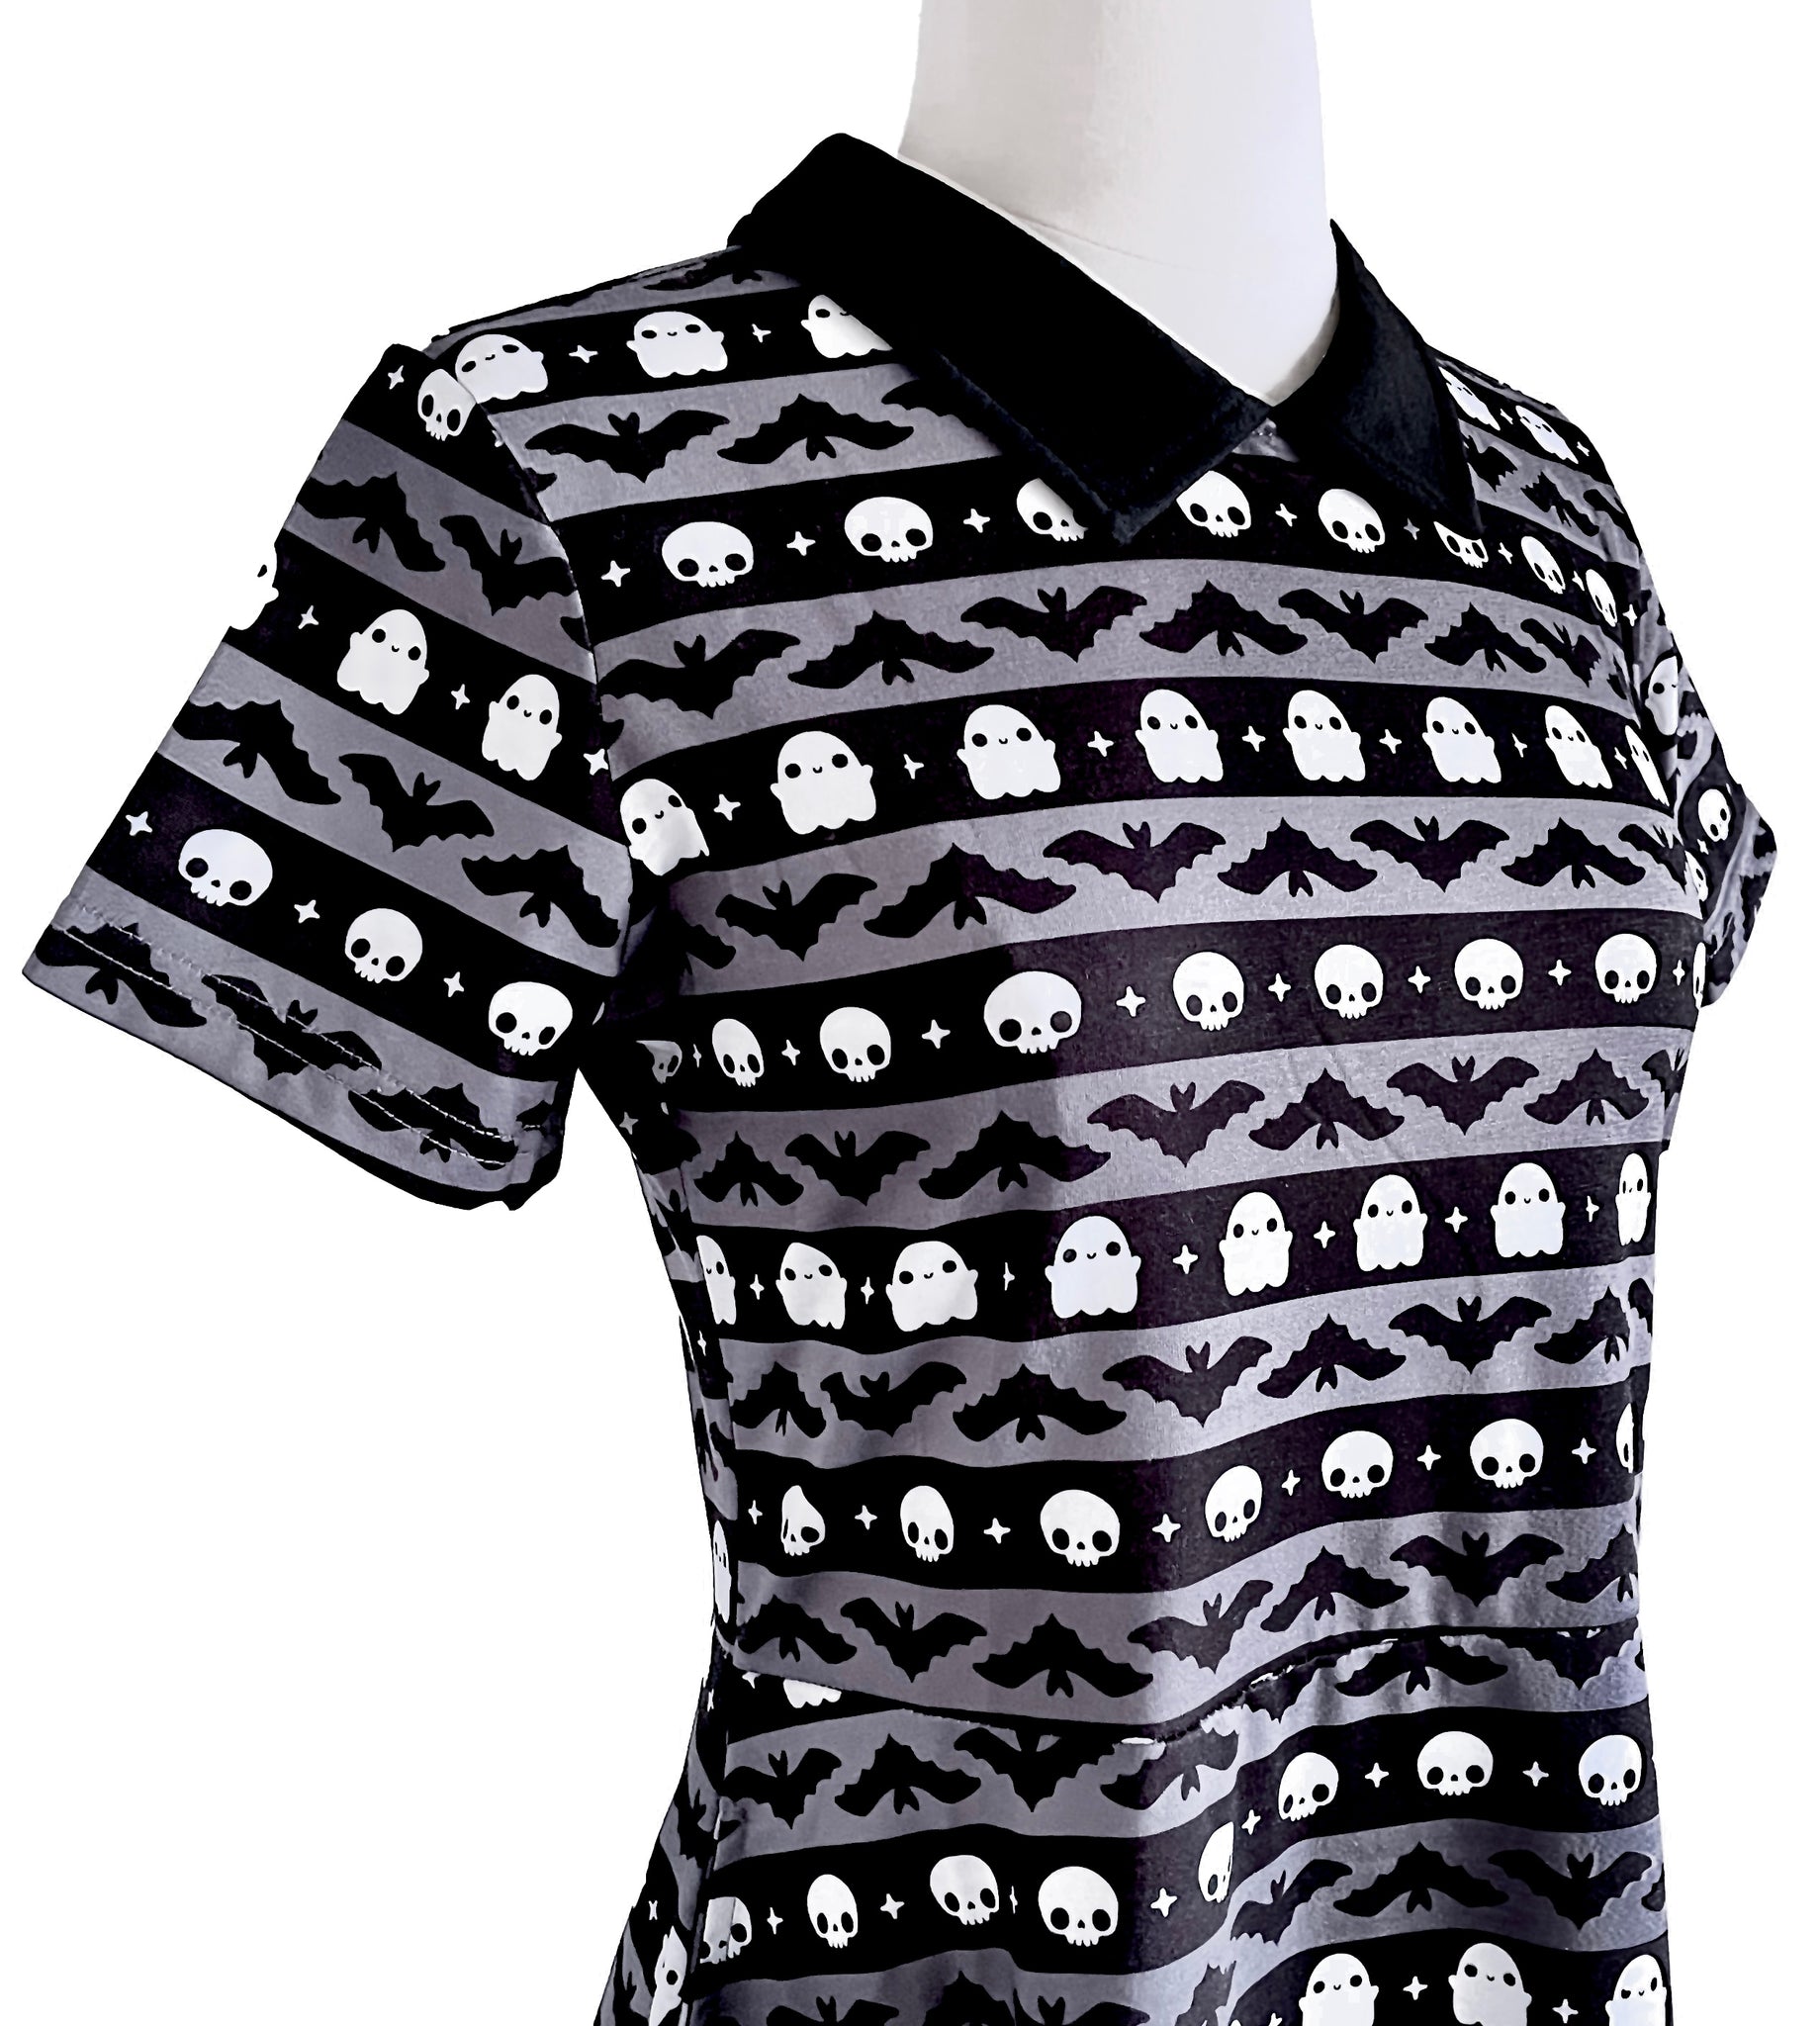 Spooky Stripes Collared A-line Dress - Sizes S through 4X